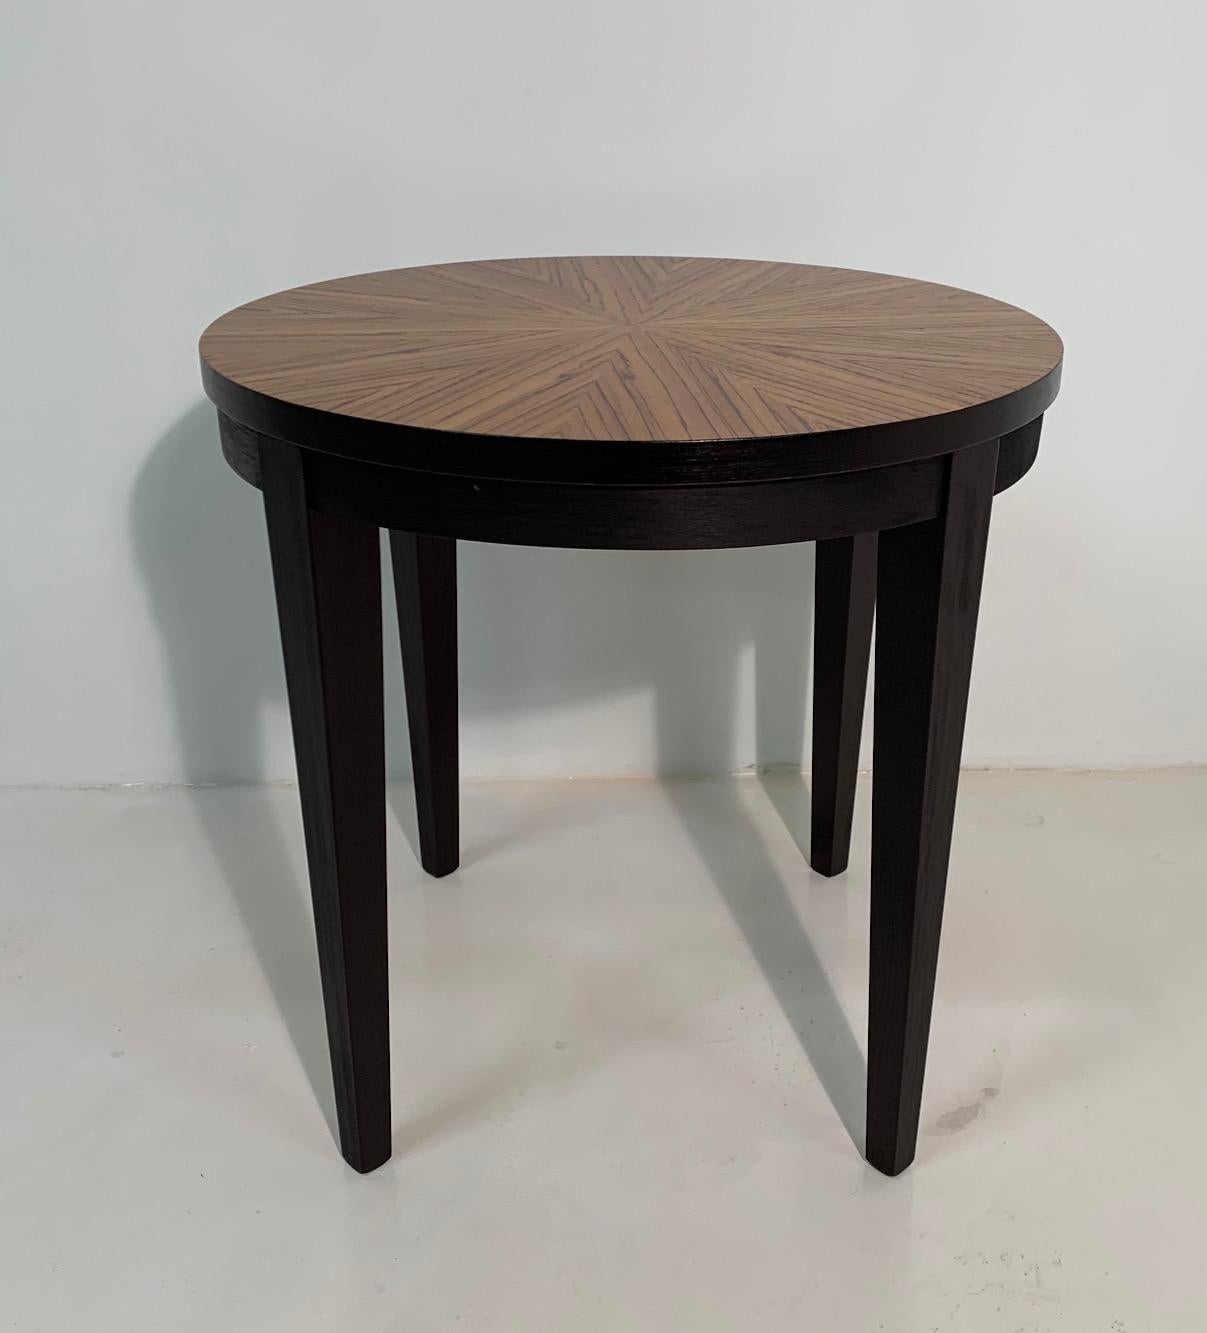 This Art Deco style coffee table was produced in Italy, Zebrano top and black lacquered legs.
Totally restored.